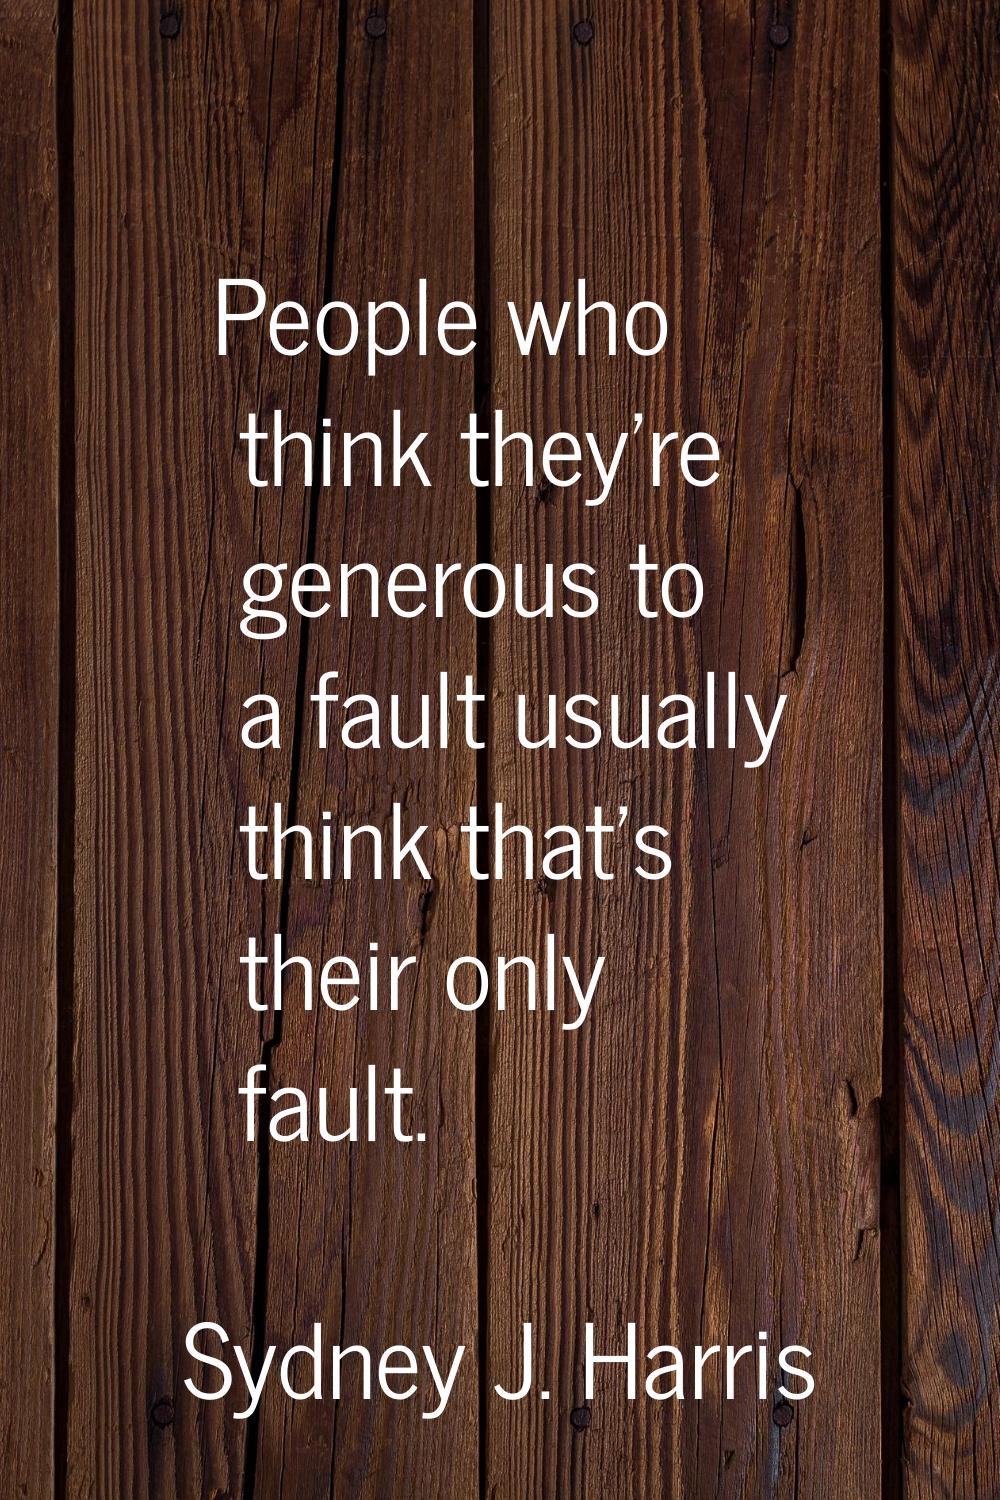 People who think they're generous to a fault usually think that's their only fault.